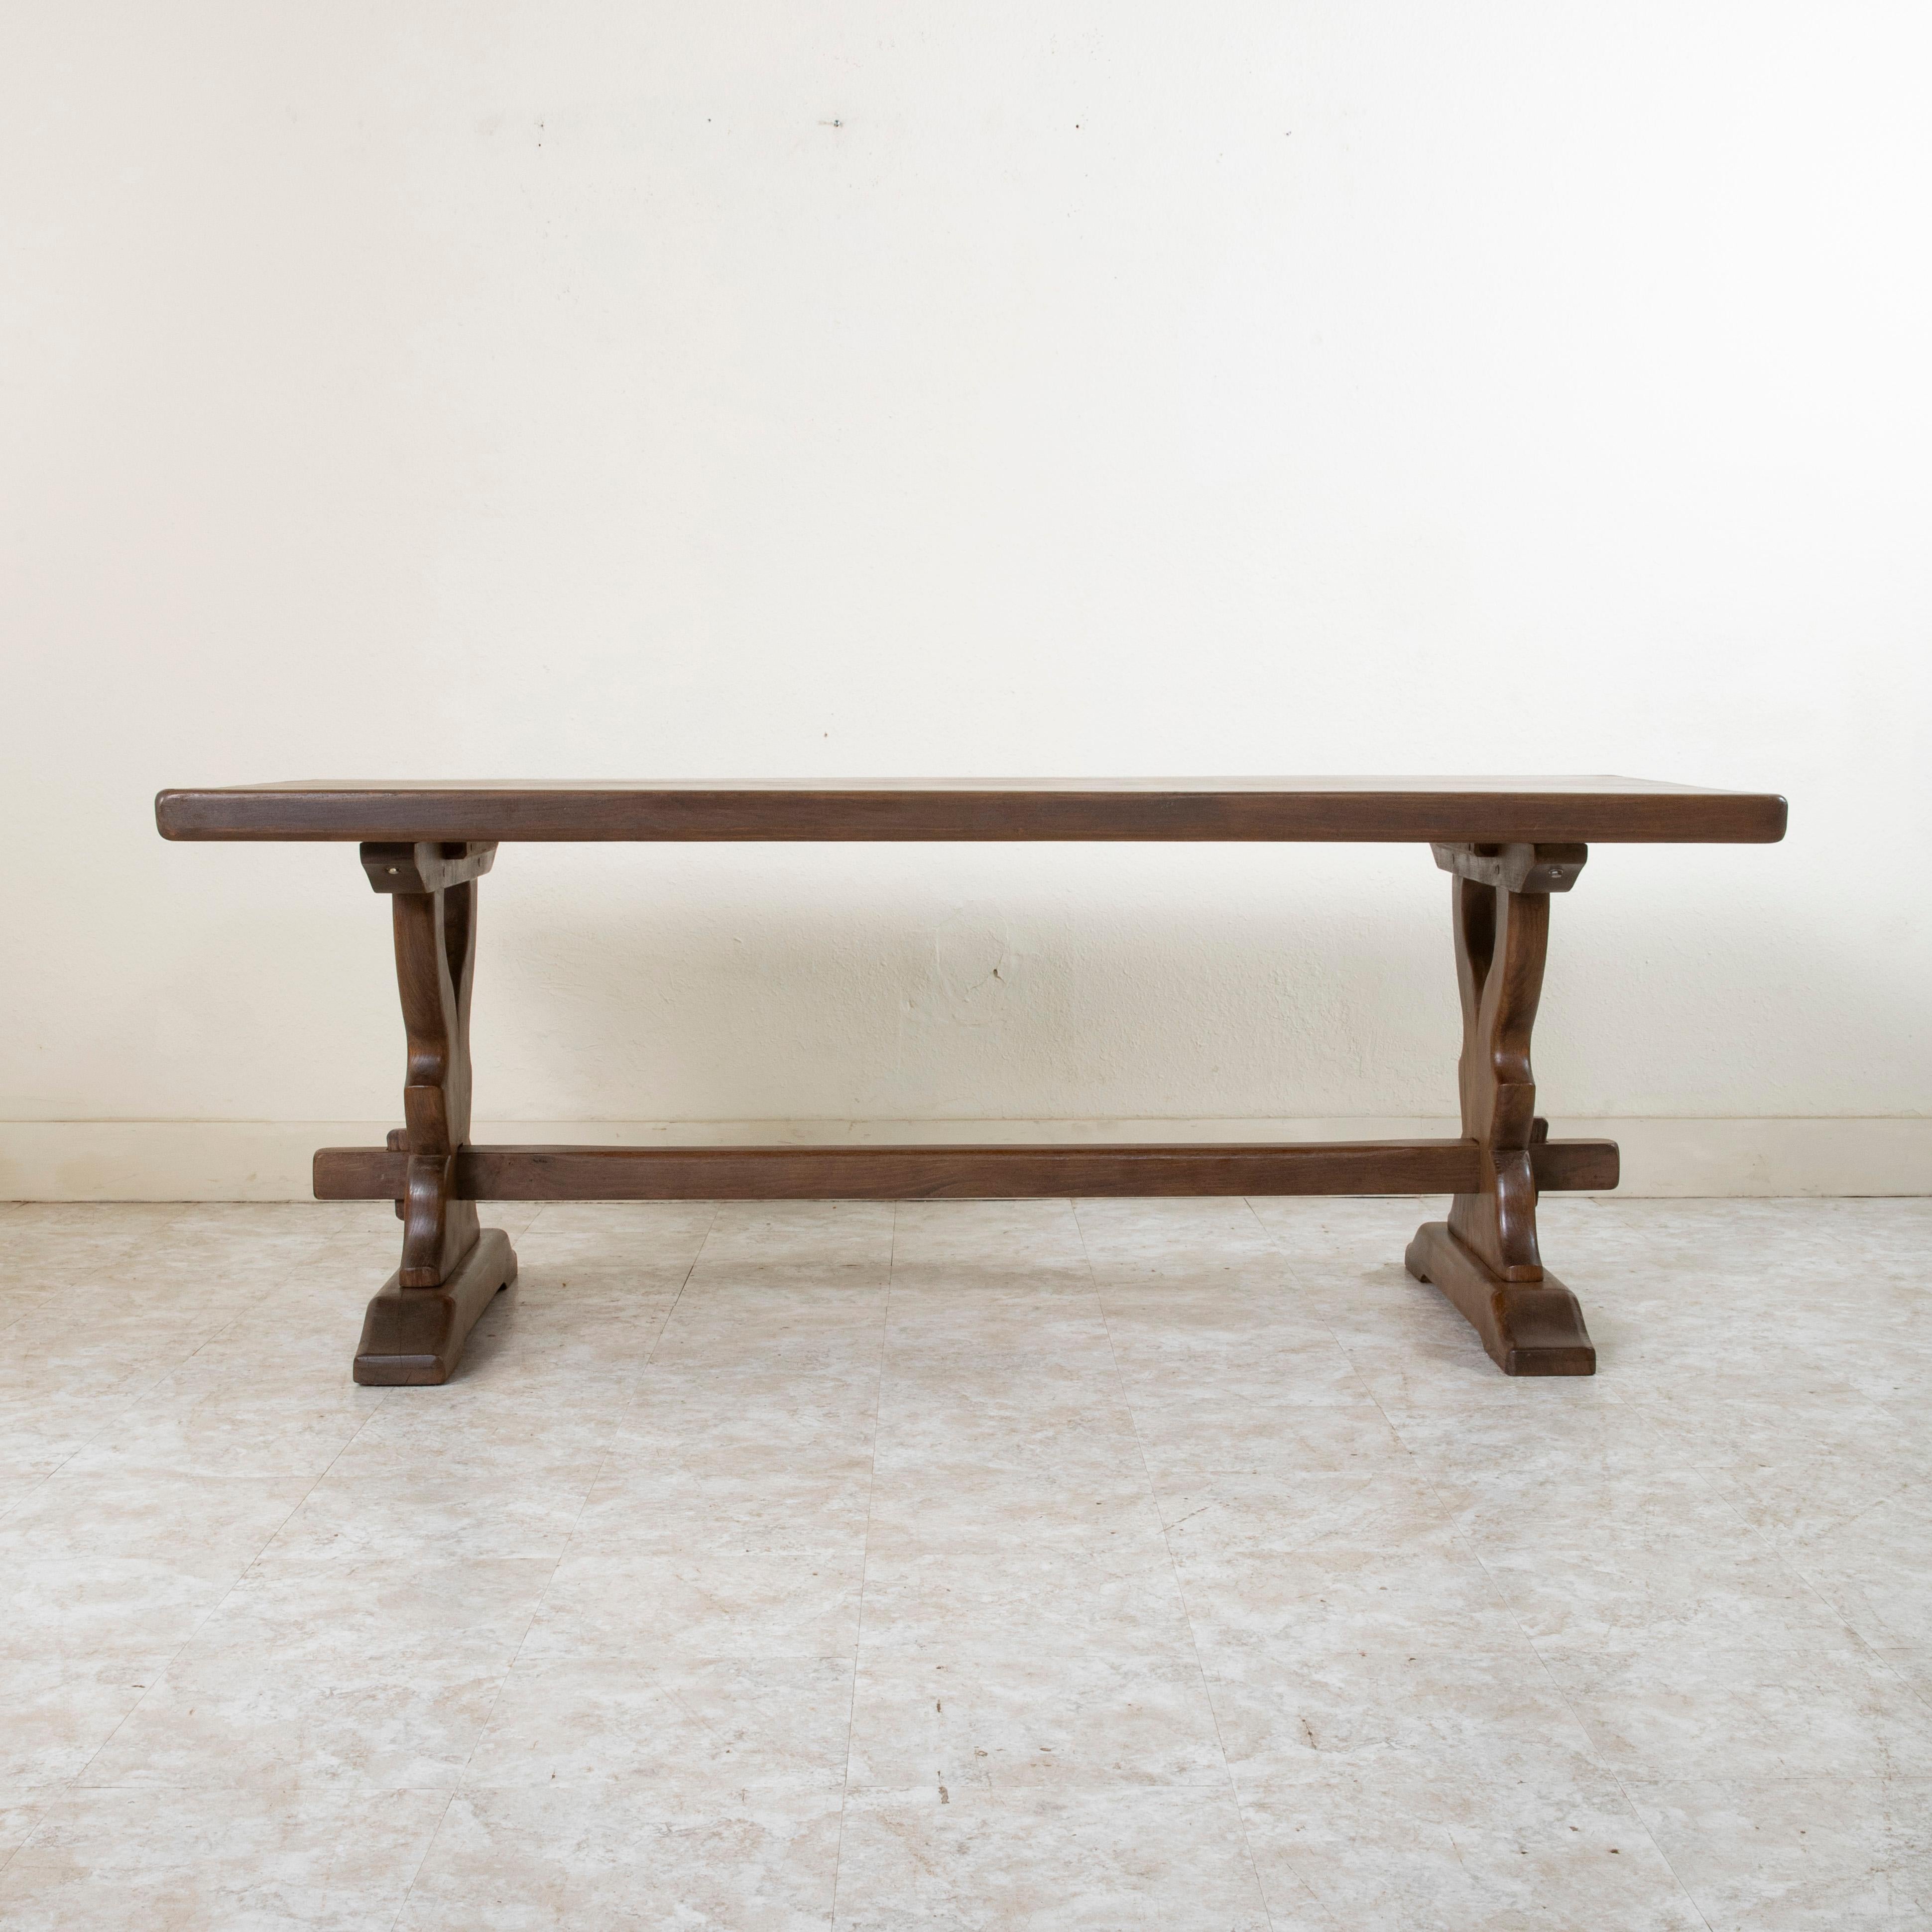 Early 20th Century French Oak Monastery Table, Dining Table, Farm Table In Good Condition For Sale In Fayetteville, AR